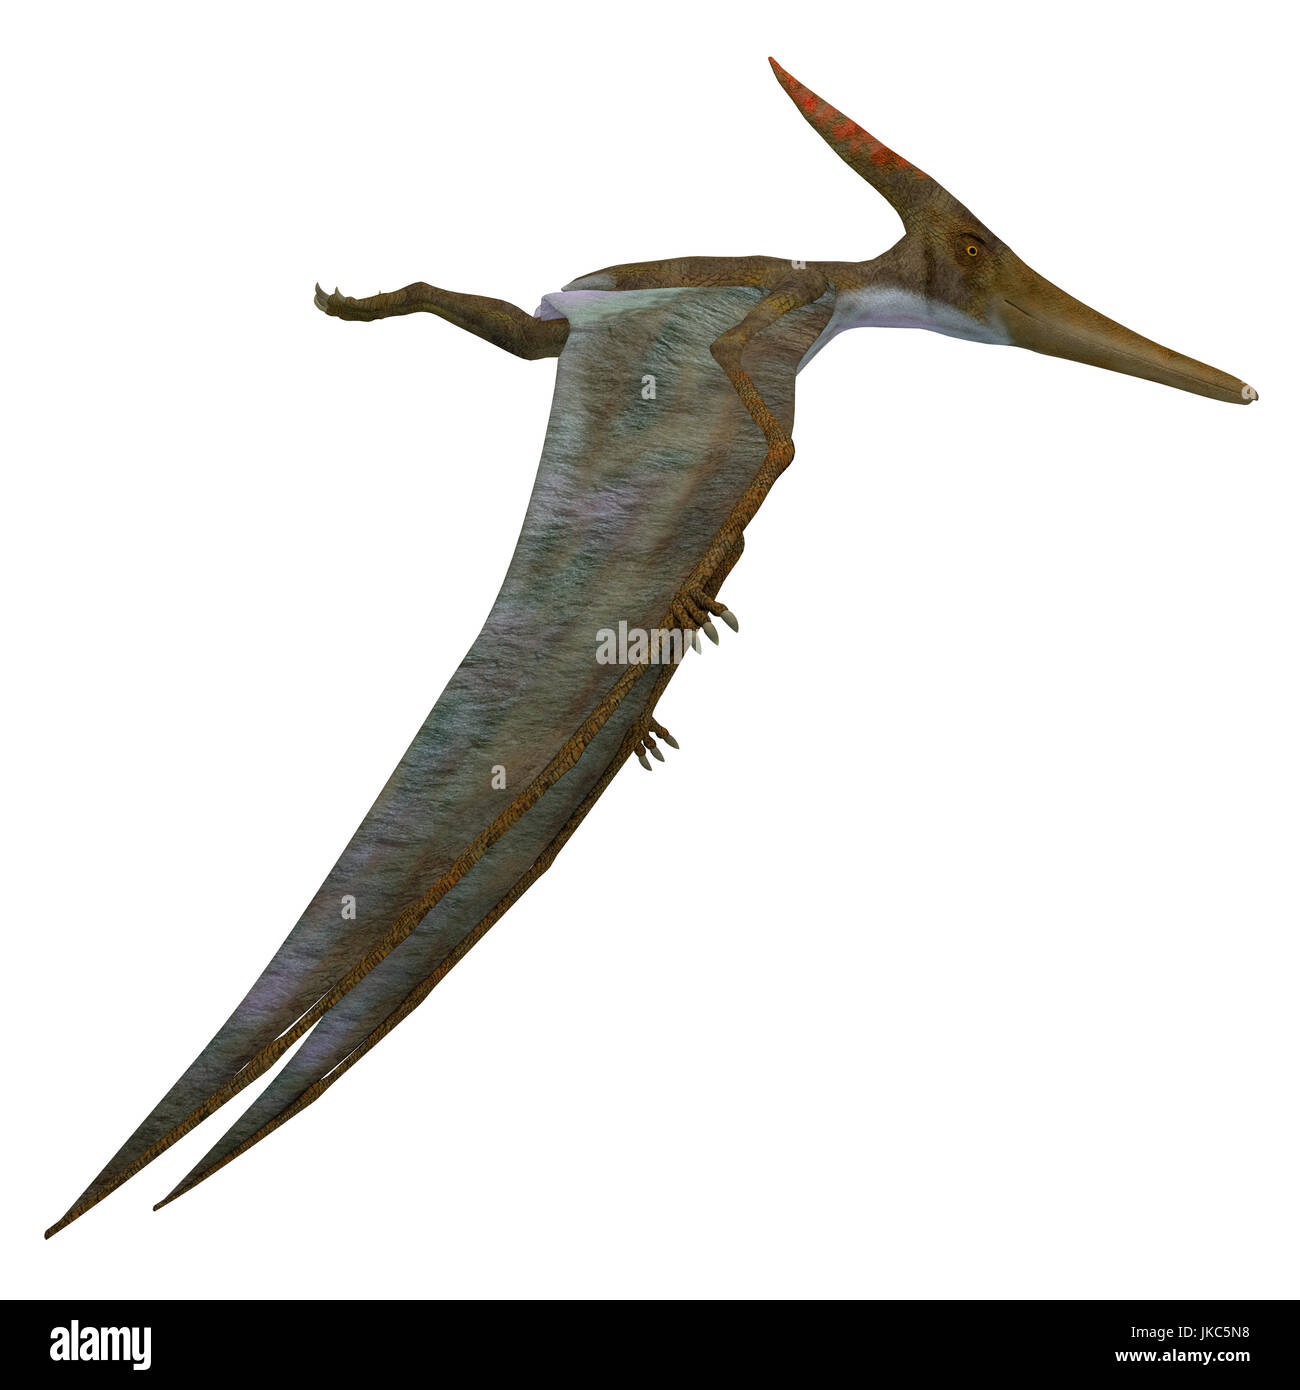 Pteranodon Reptile Side Profile - Pteranodon was a flying carnivorous reptile that lived in North America in the Cretaceous Period. Stock Photo